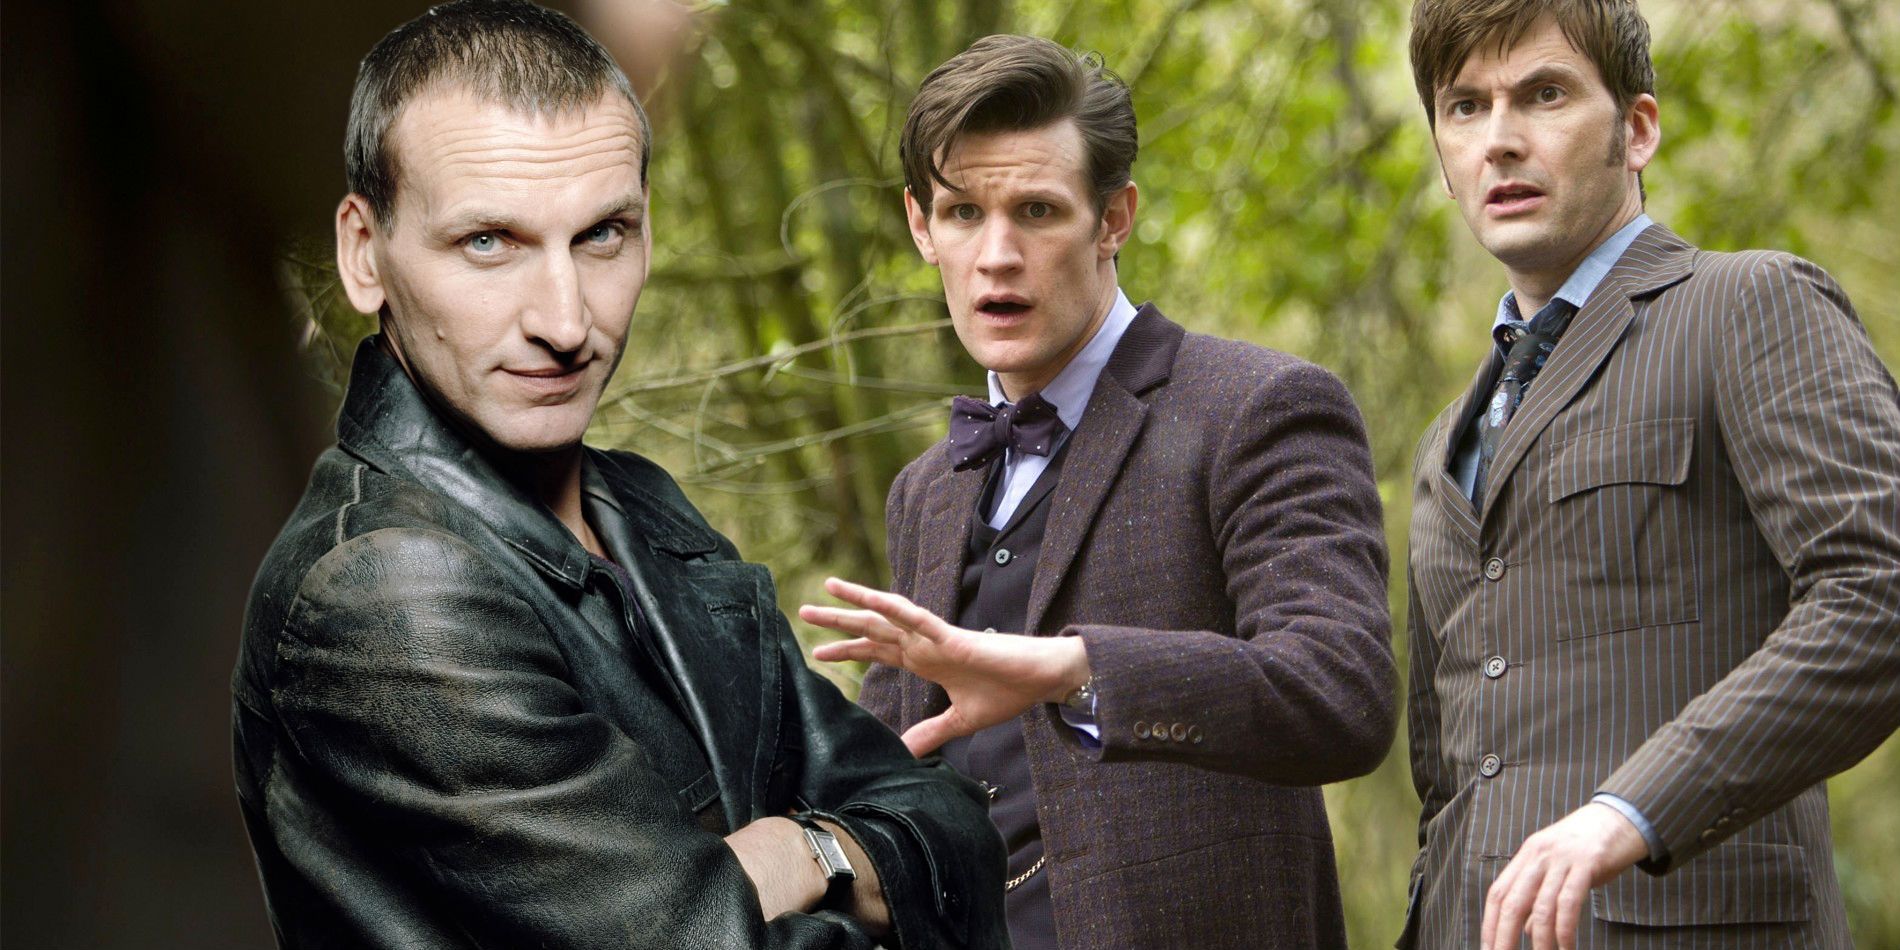 Blended image of the Ninth and Eleventh and Tenth Doctors in Doctor Who